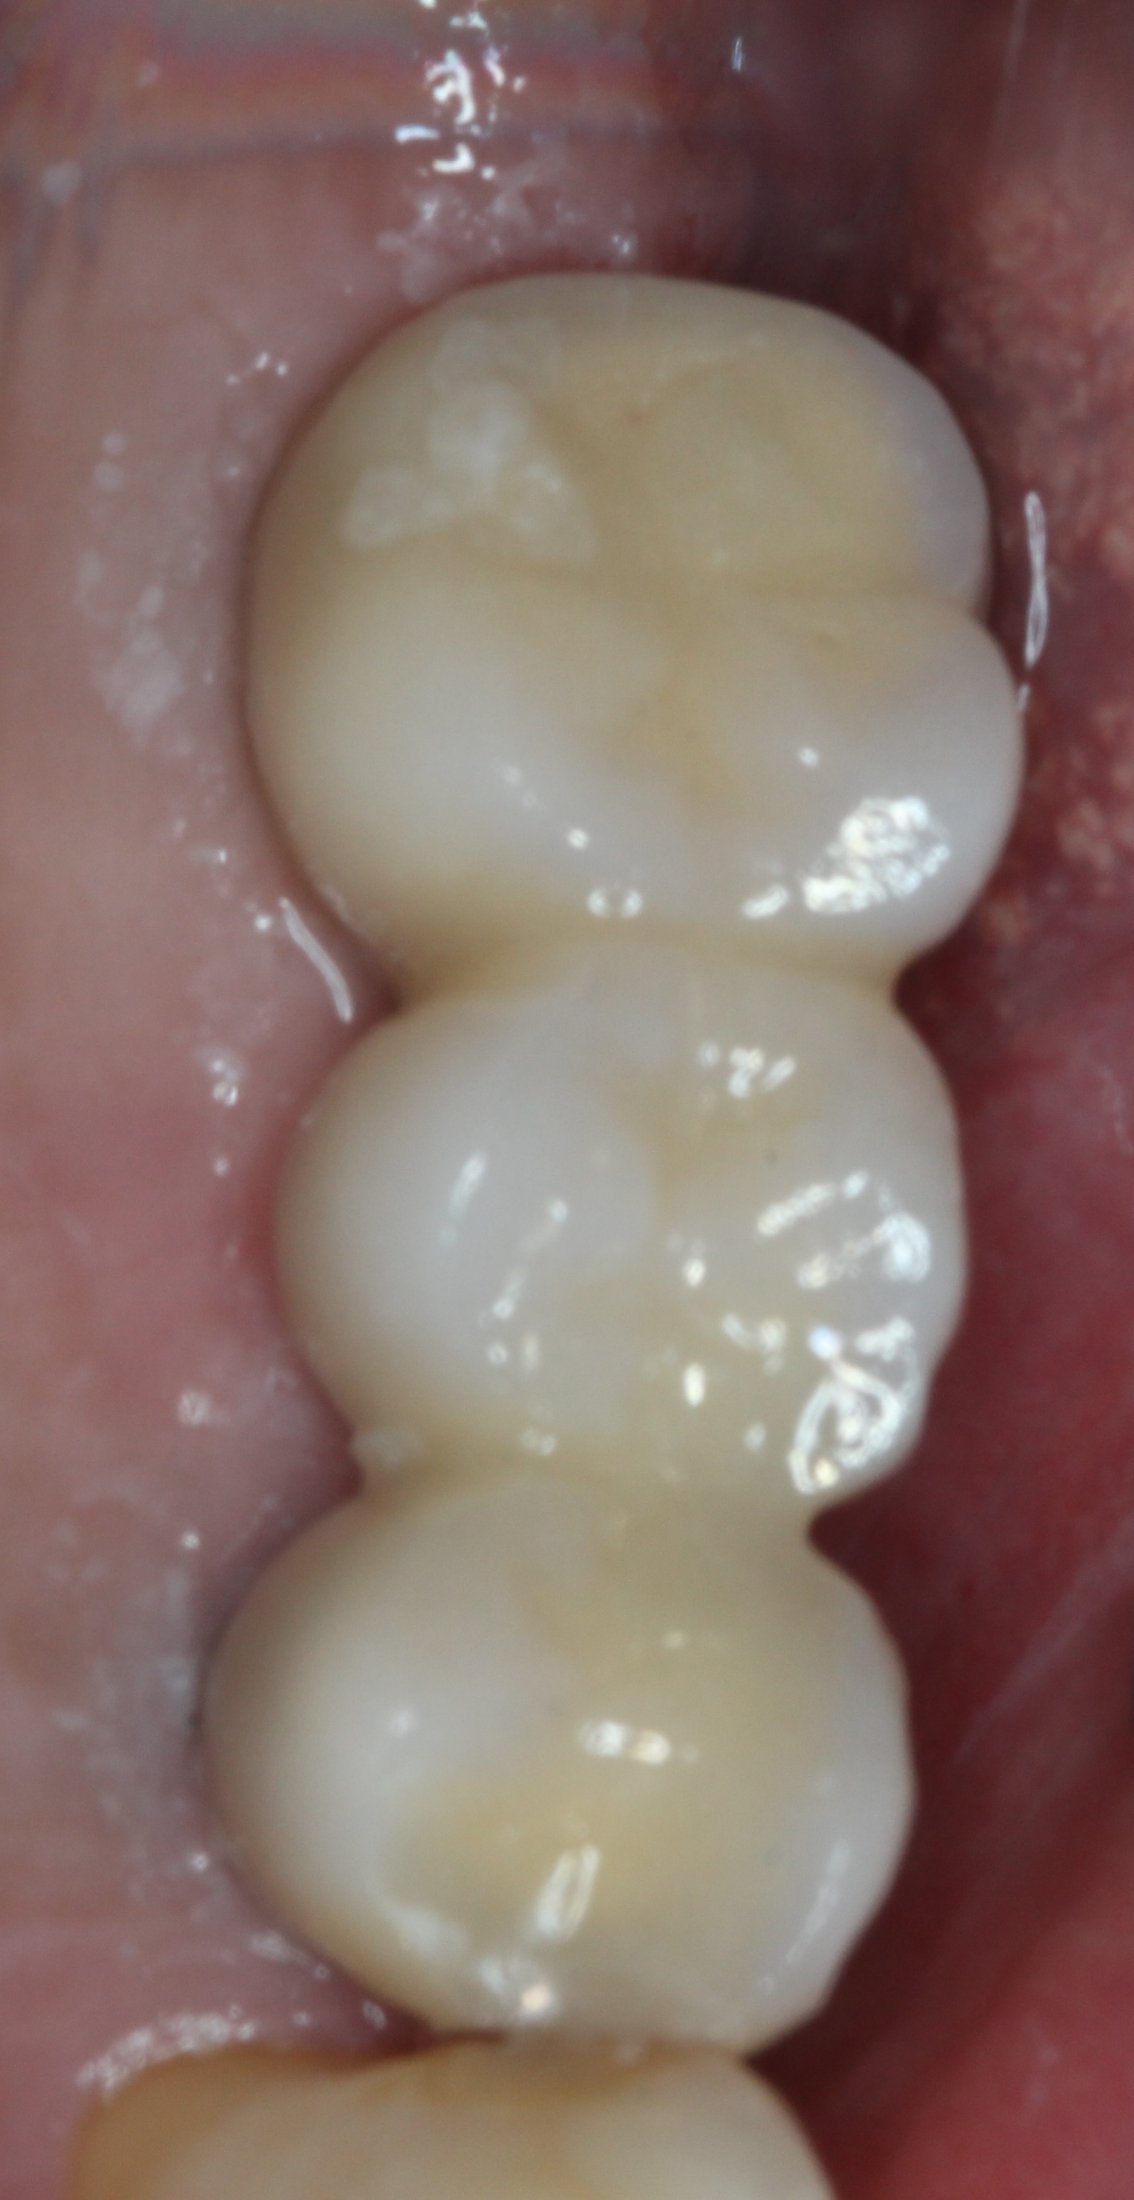 posterior bridge after placement in mouth